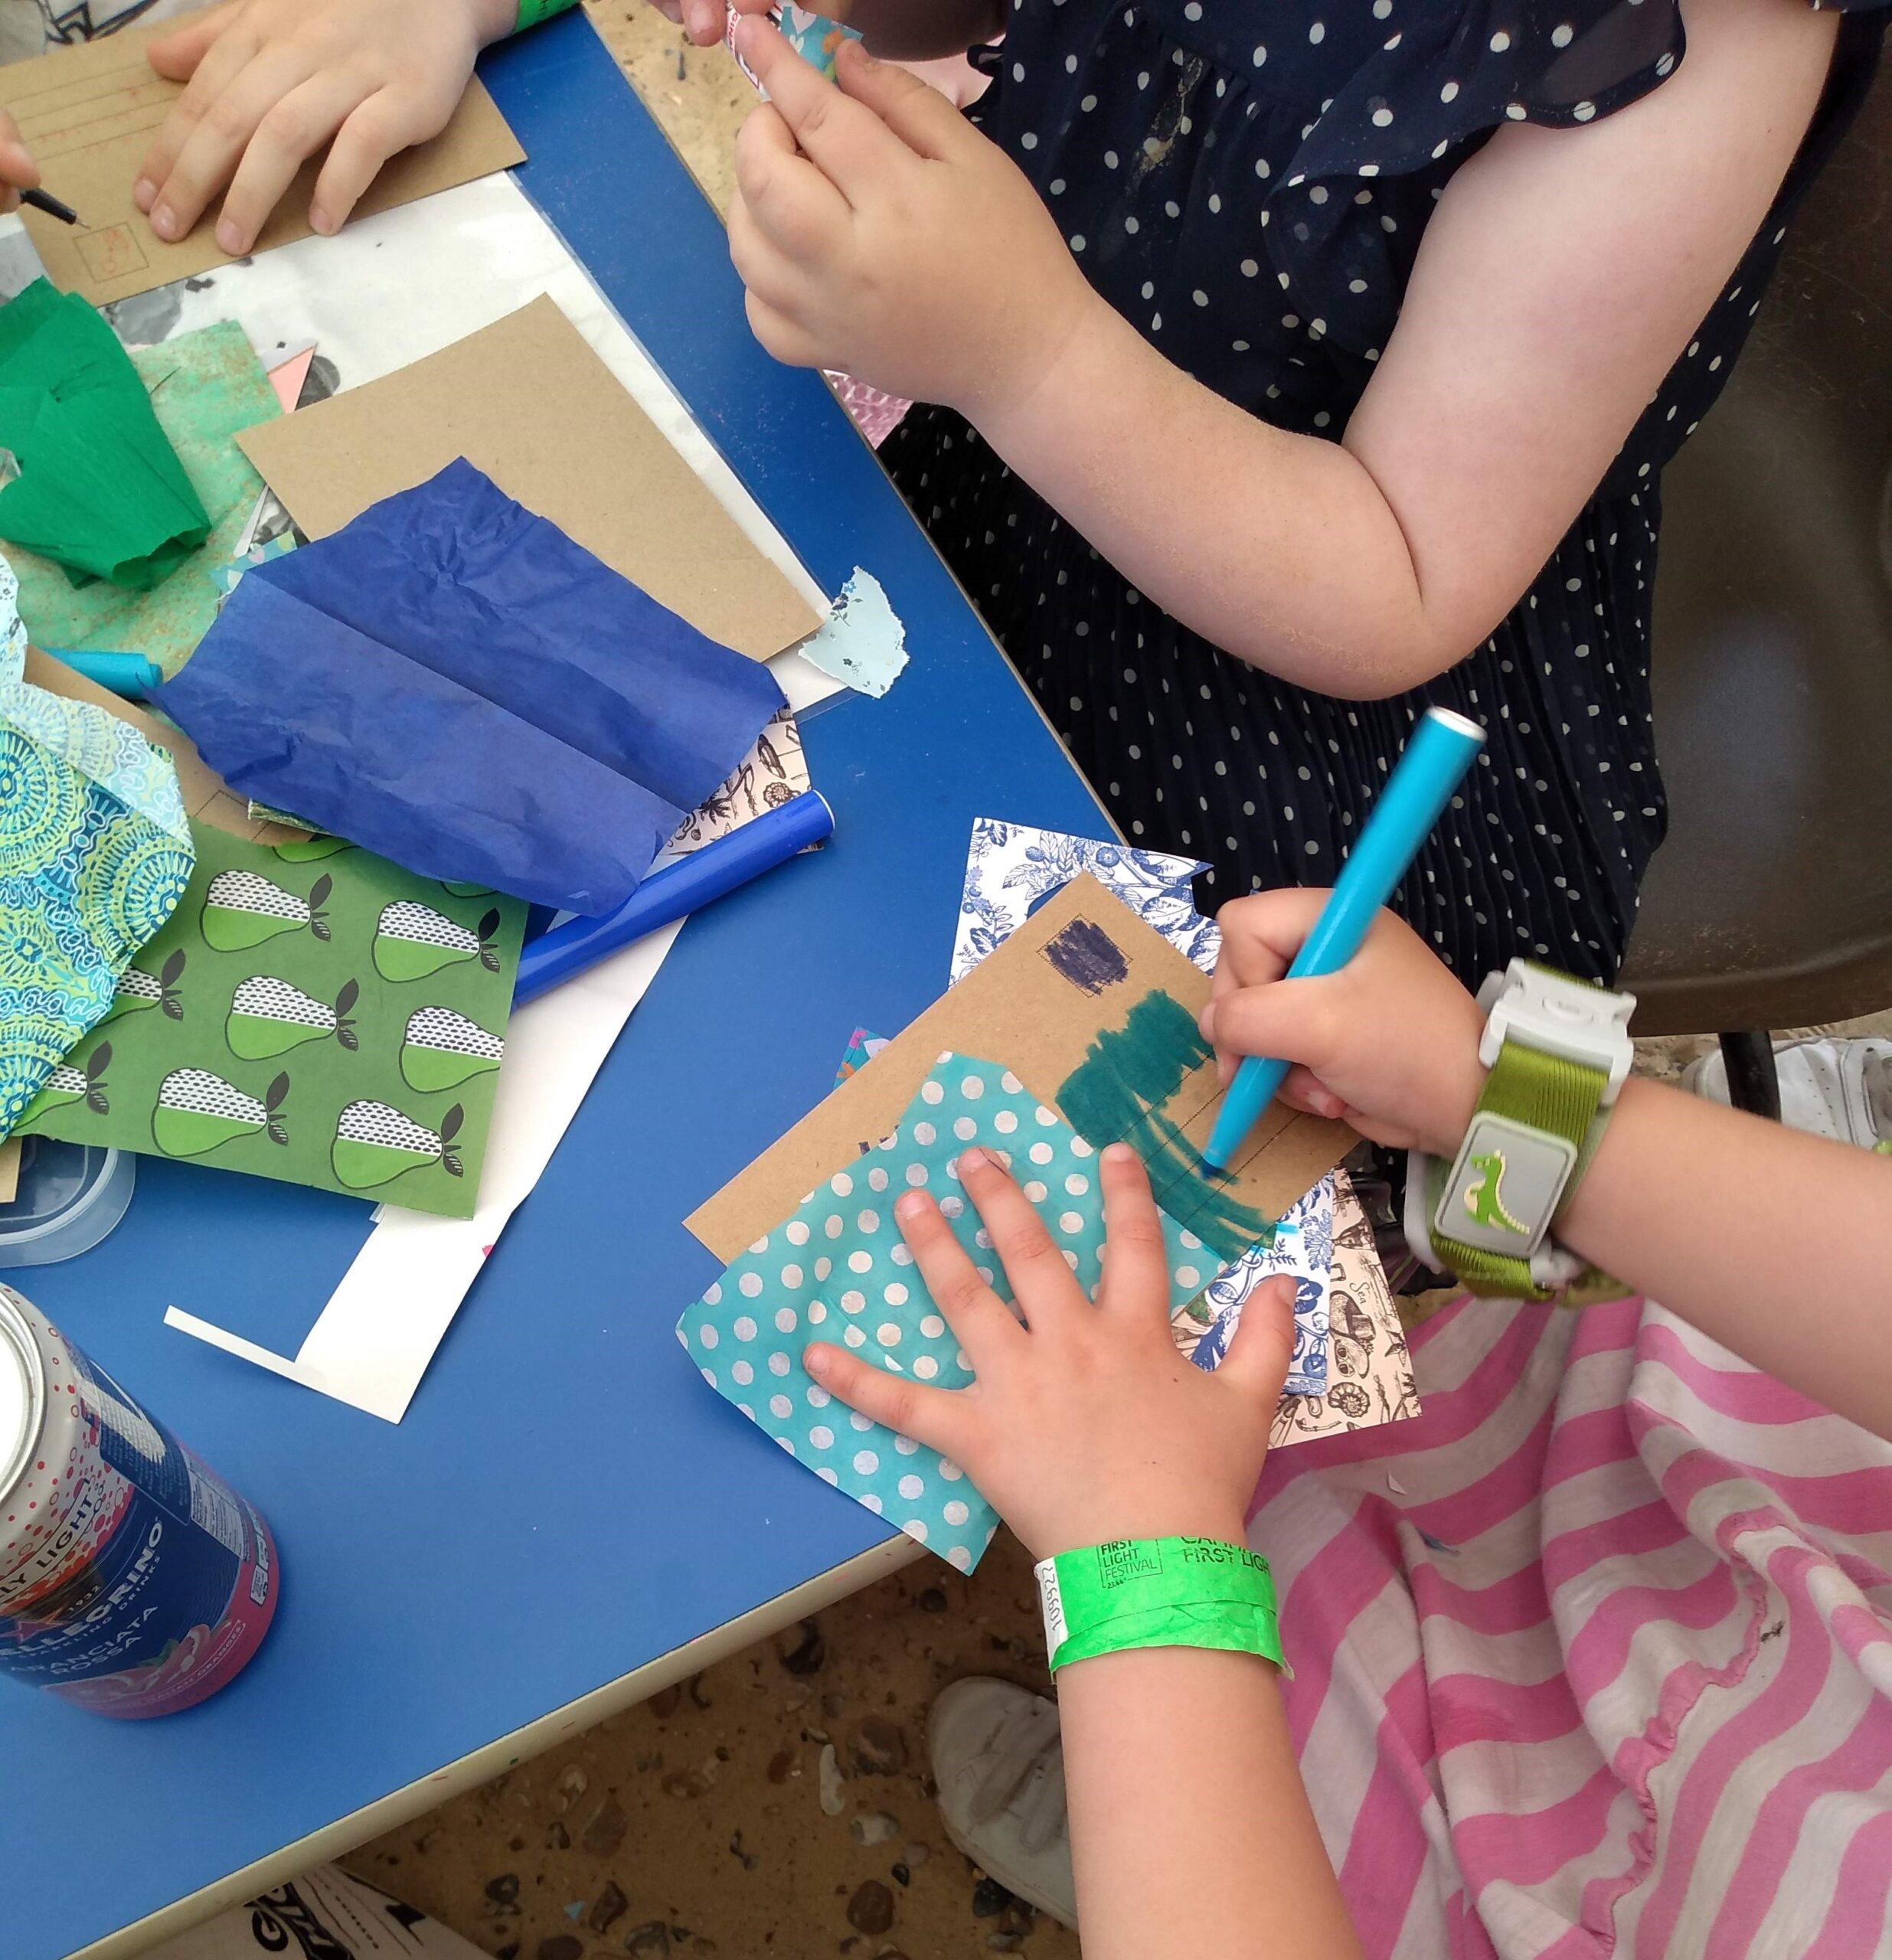 Children seated at a table. One is holding a piece of blue and white dotted tissue paper in place, whilst colouring beside it in blue felt tip pen. Another child is selecting from a pile of assorted paper